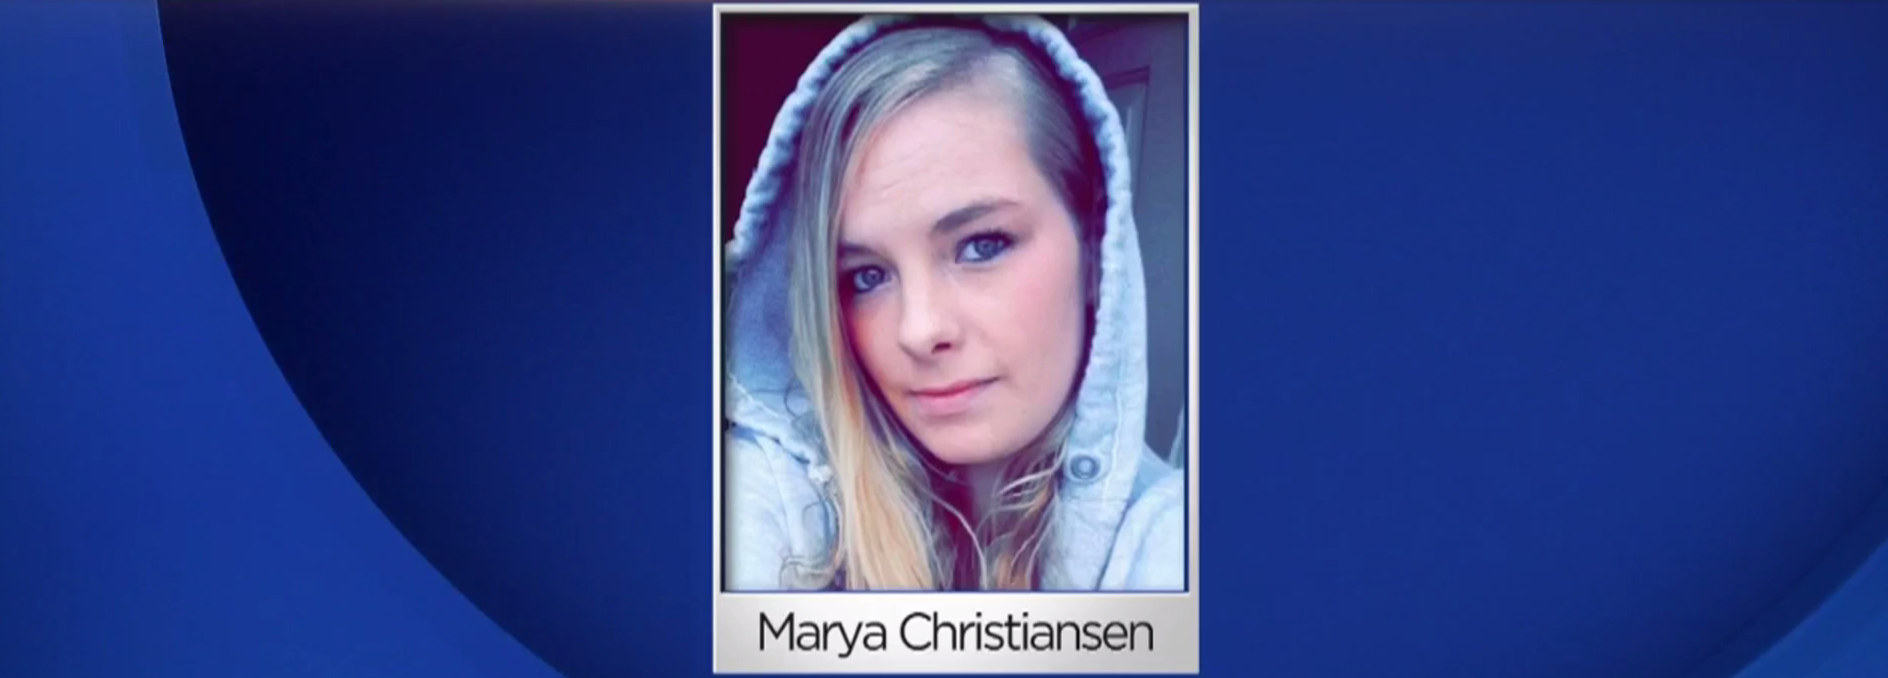 Police Body Found In River Is Missing Minnesota Woman Marya Christiansen Cbs News 8975